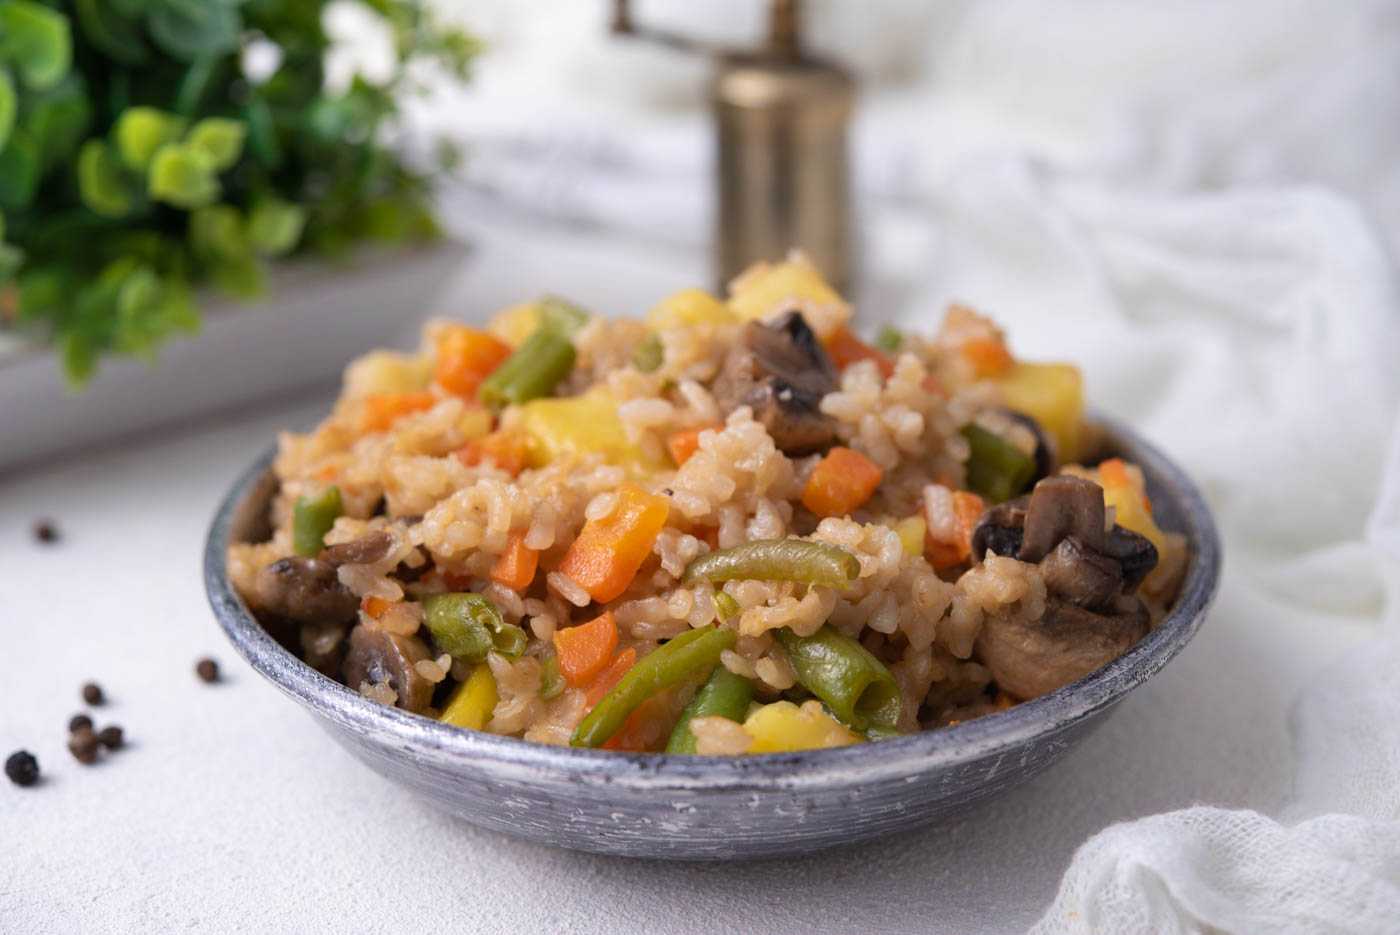 brown rice with corn, carrots pieces, green peas and mushroom in a blue bowl